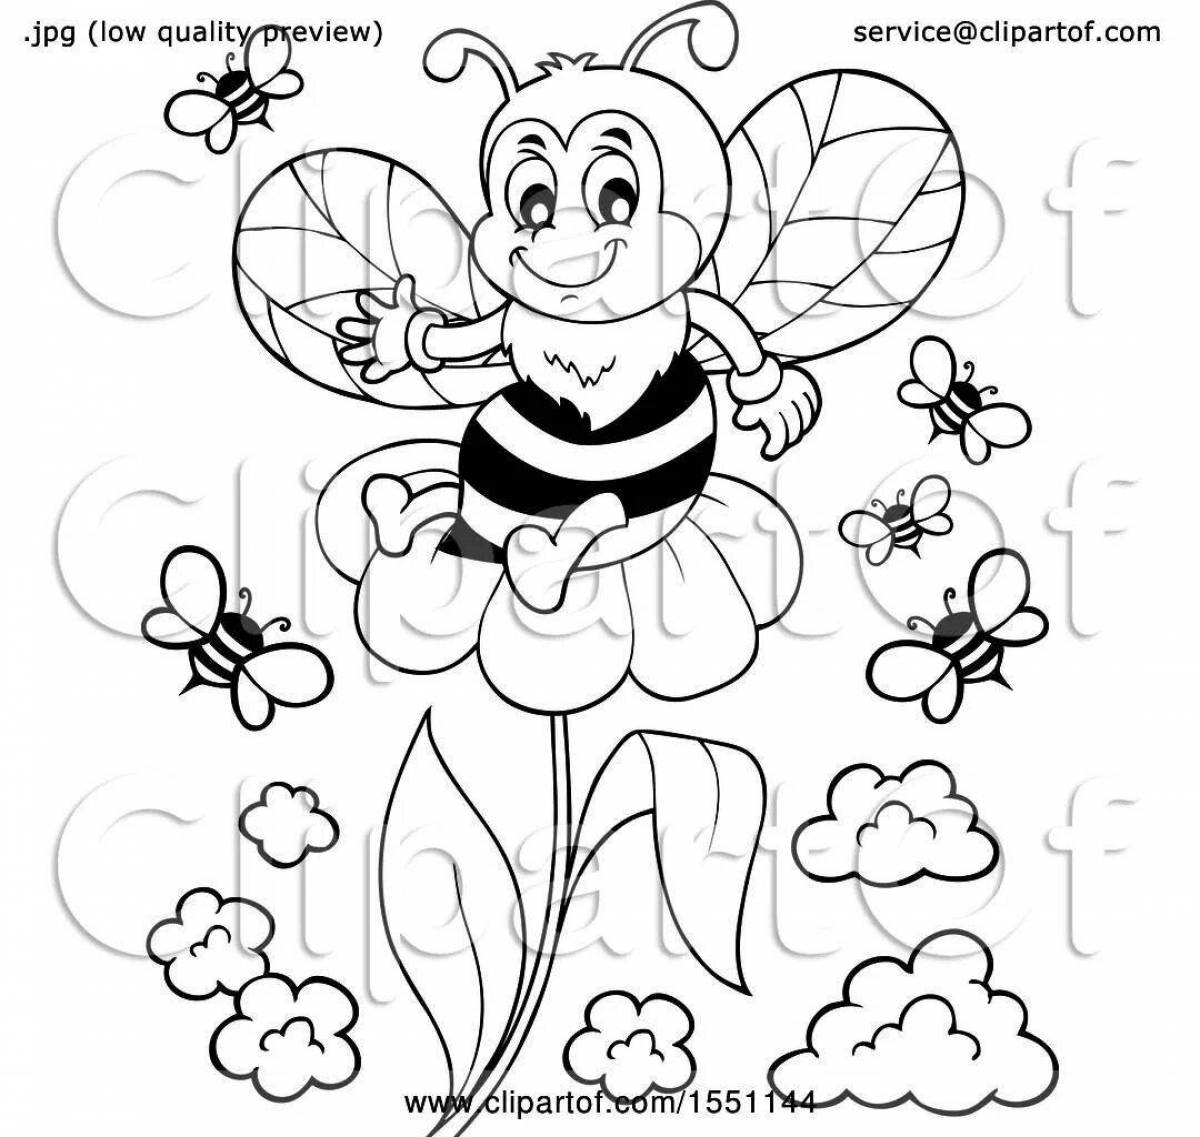 Creative bee coloring book for 6-7 year olds